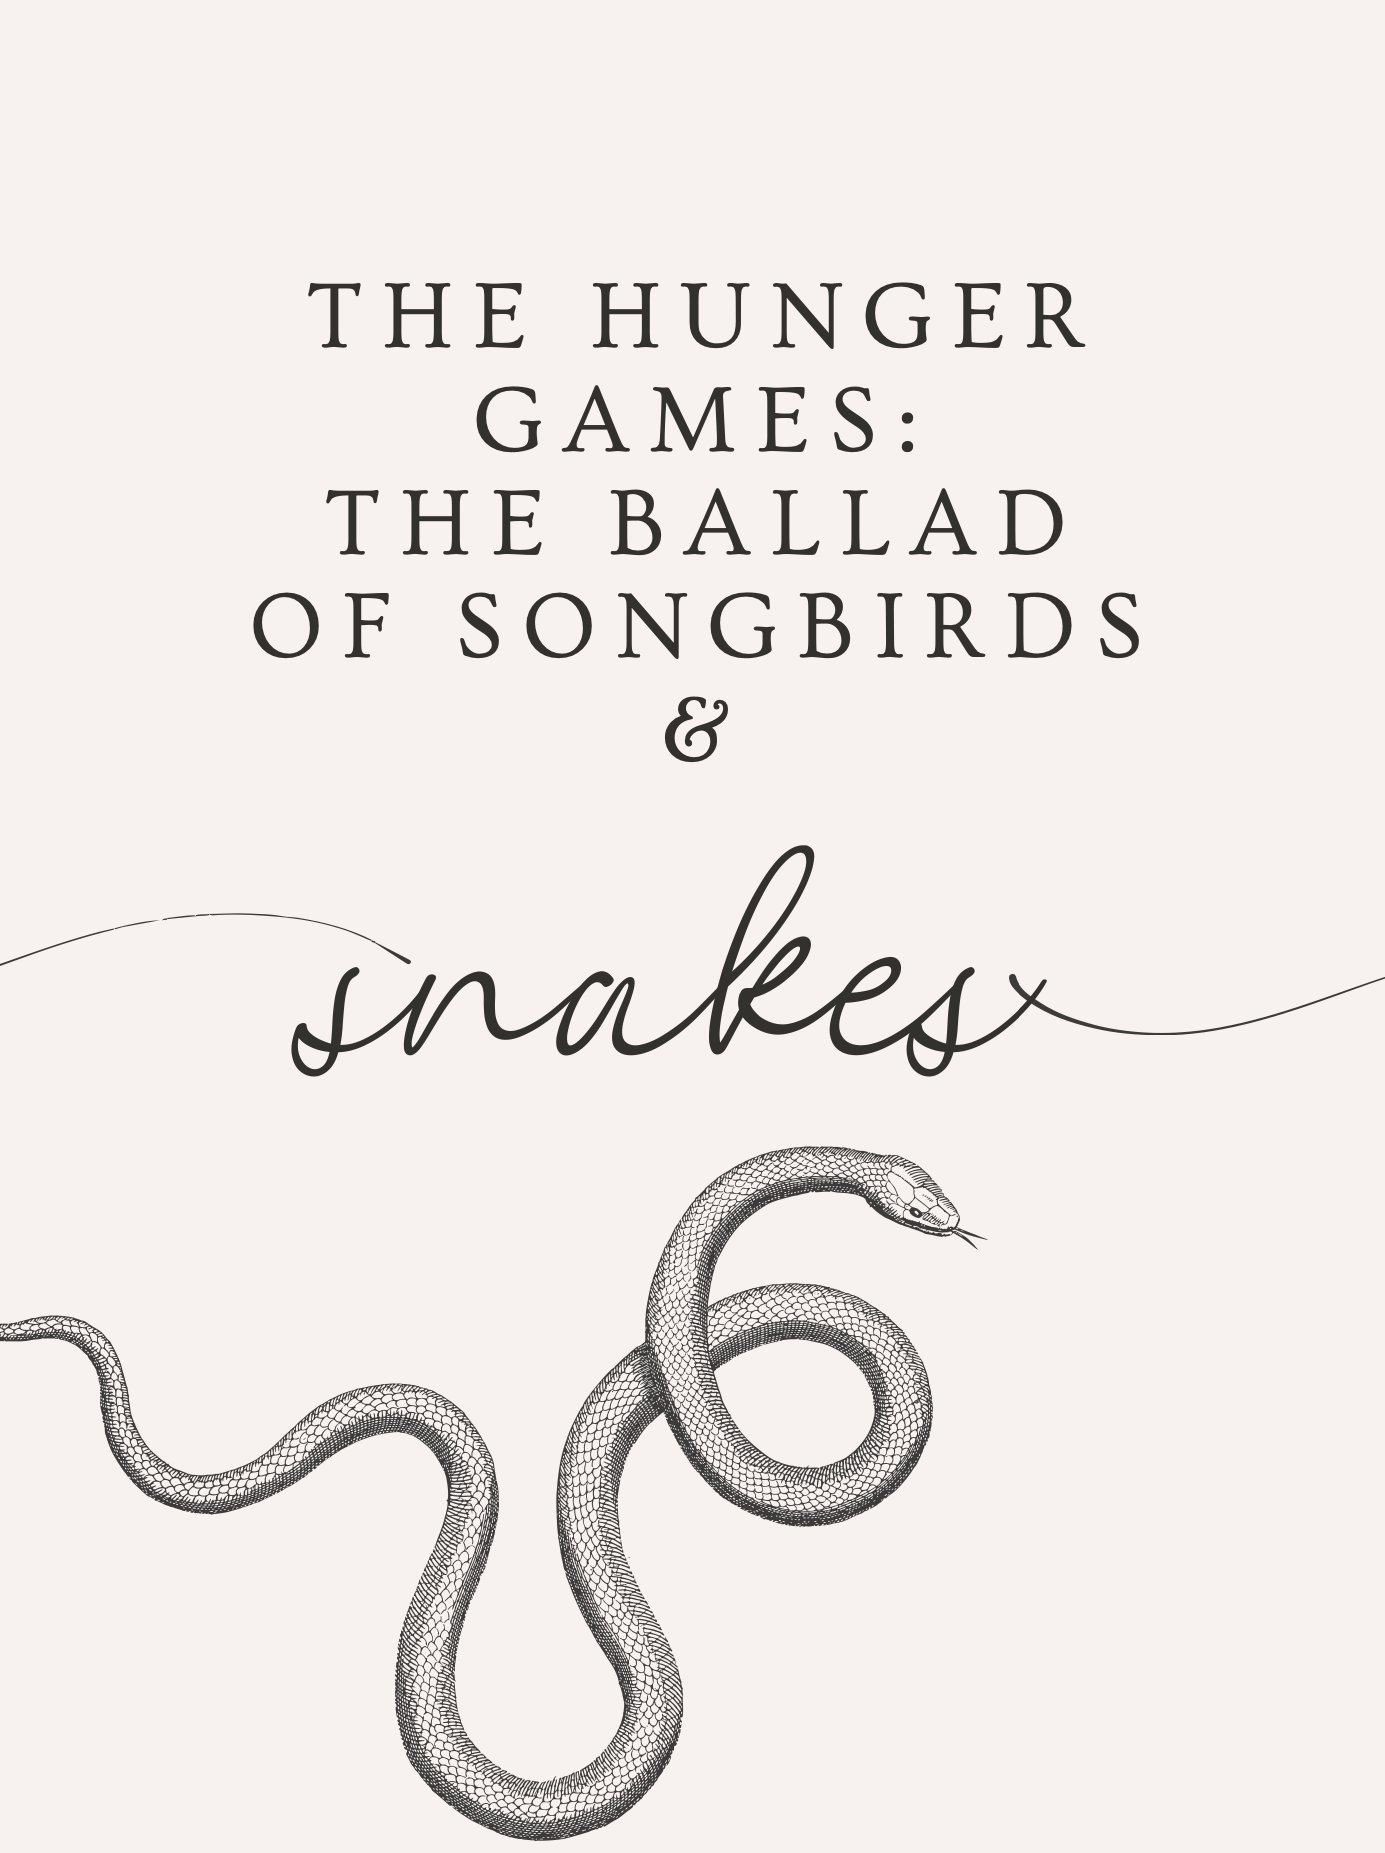 The Hunger Games: The Ballad of Songbirds & Snakes is catching cinemas on fire